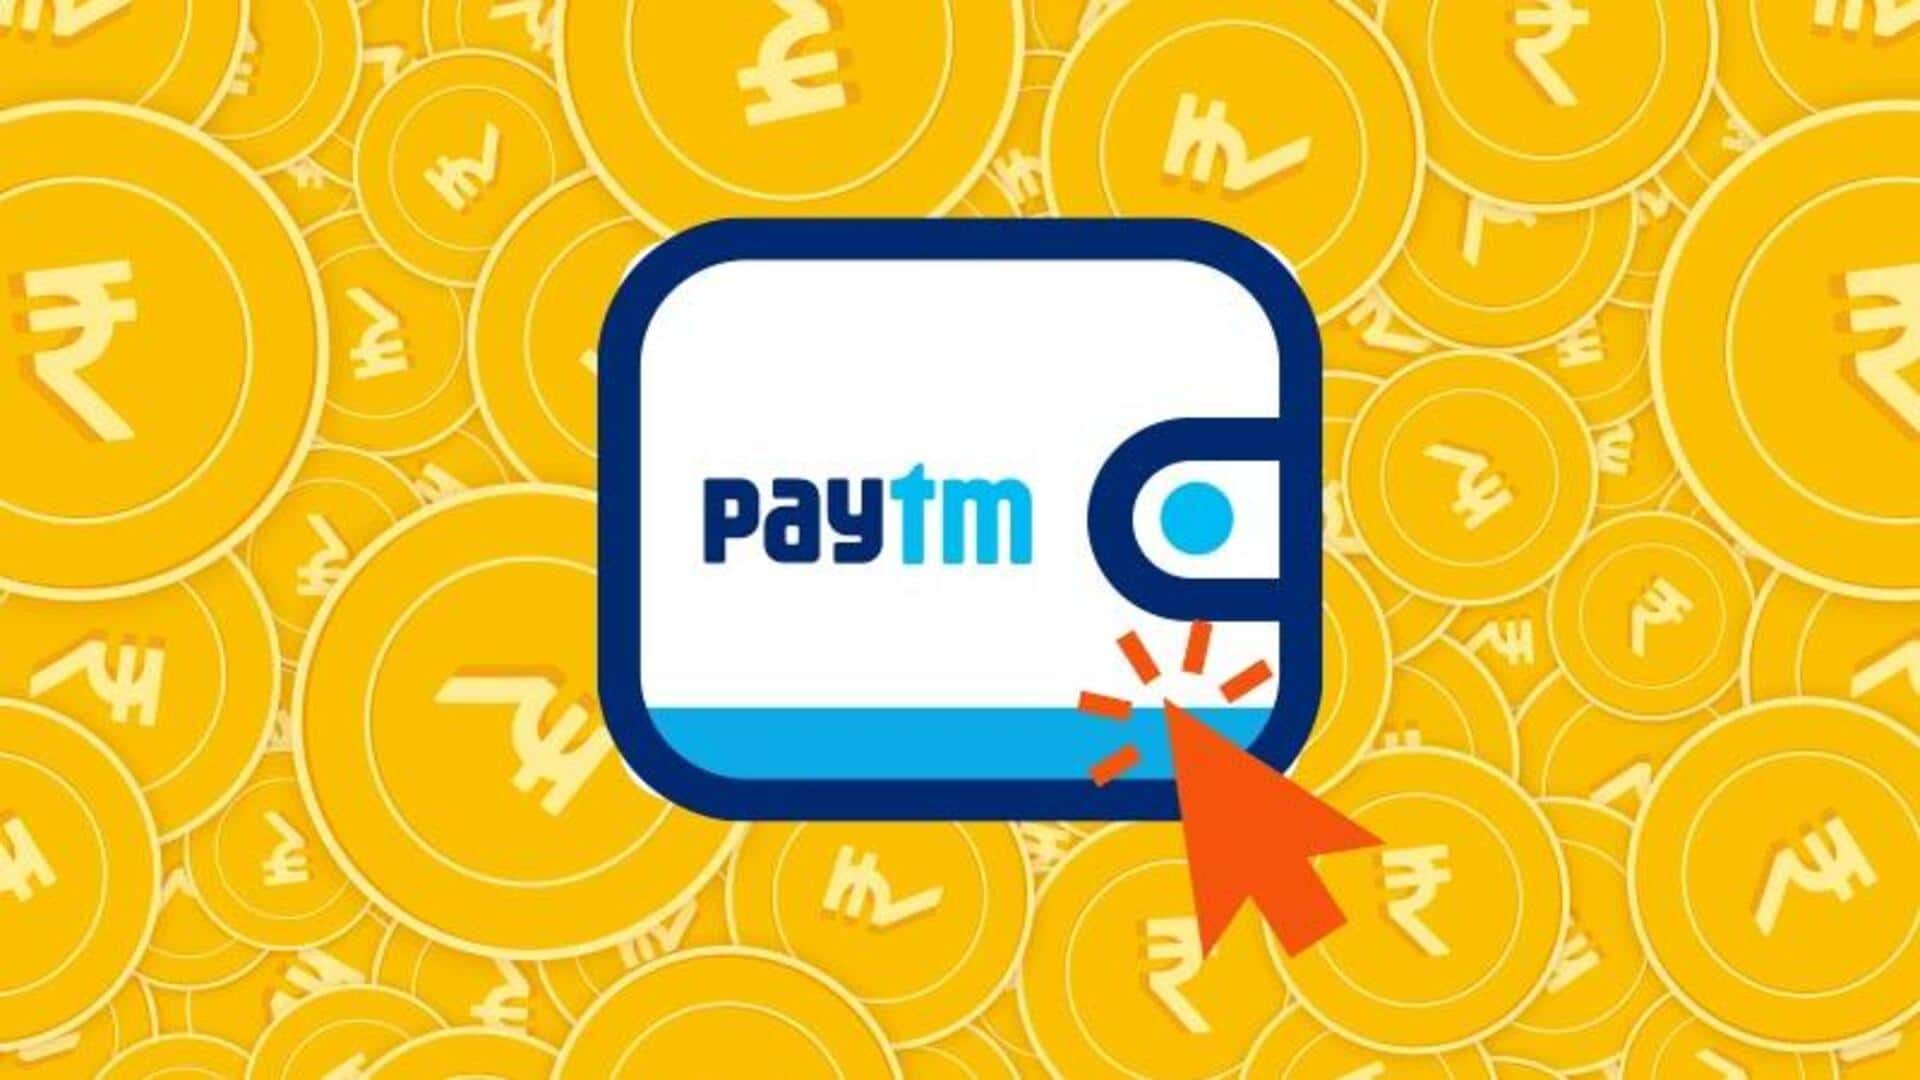 Paytm Payments Bank may lose license for flouting RBI's norms